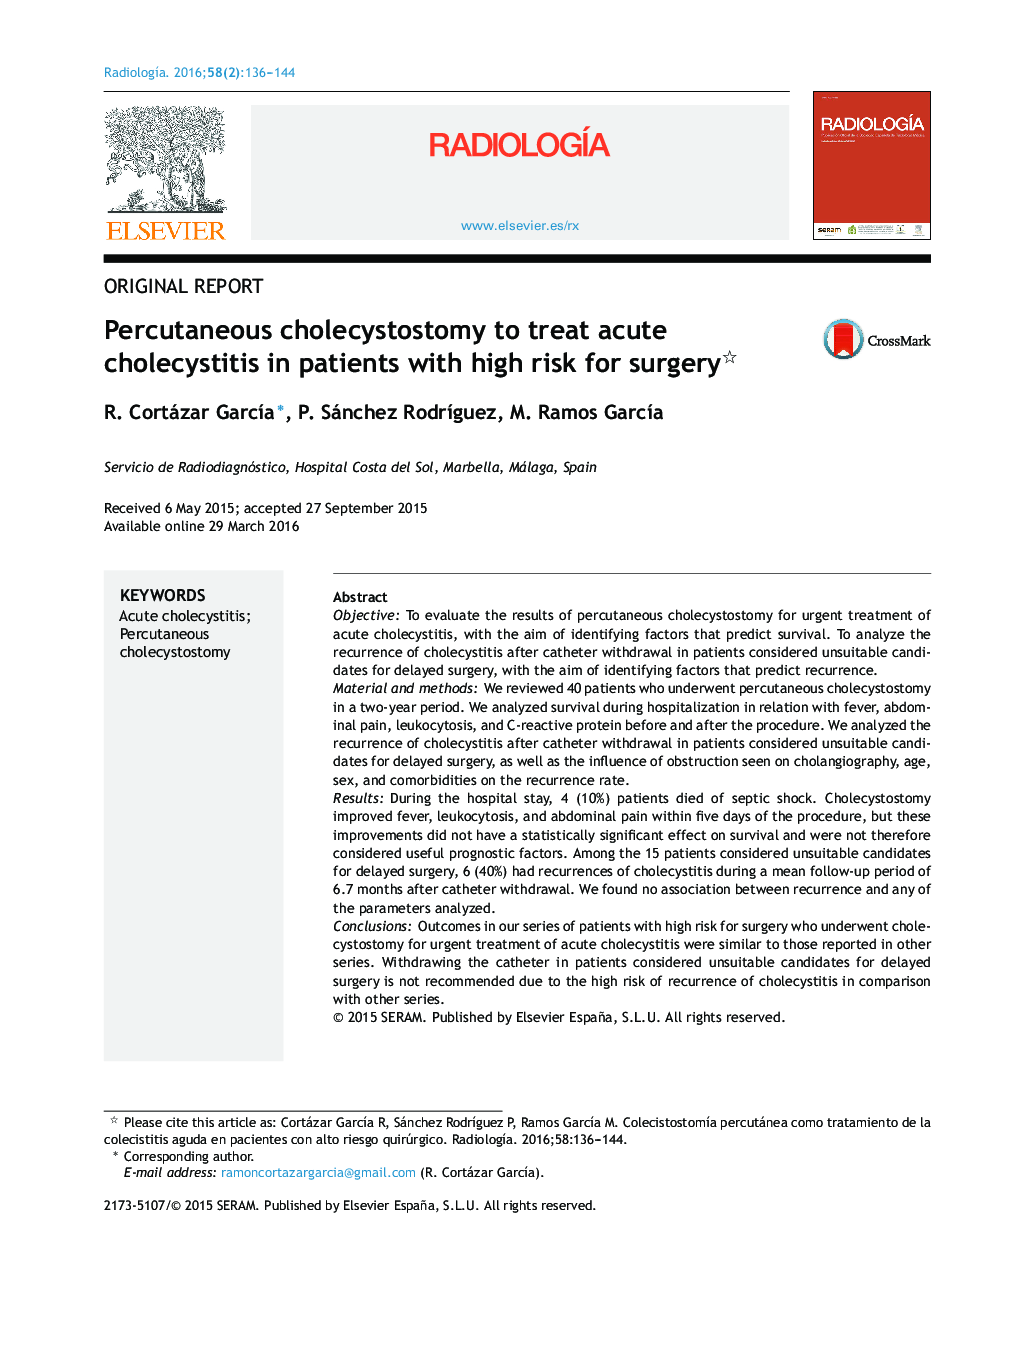 Percutaneous cholecystostomy to treat acute cholecystitis in patients with high risk for surgery 